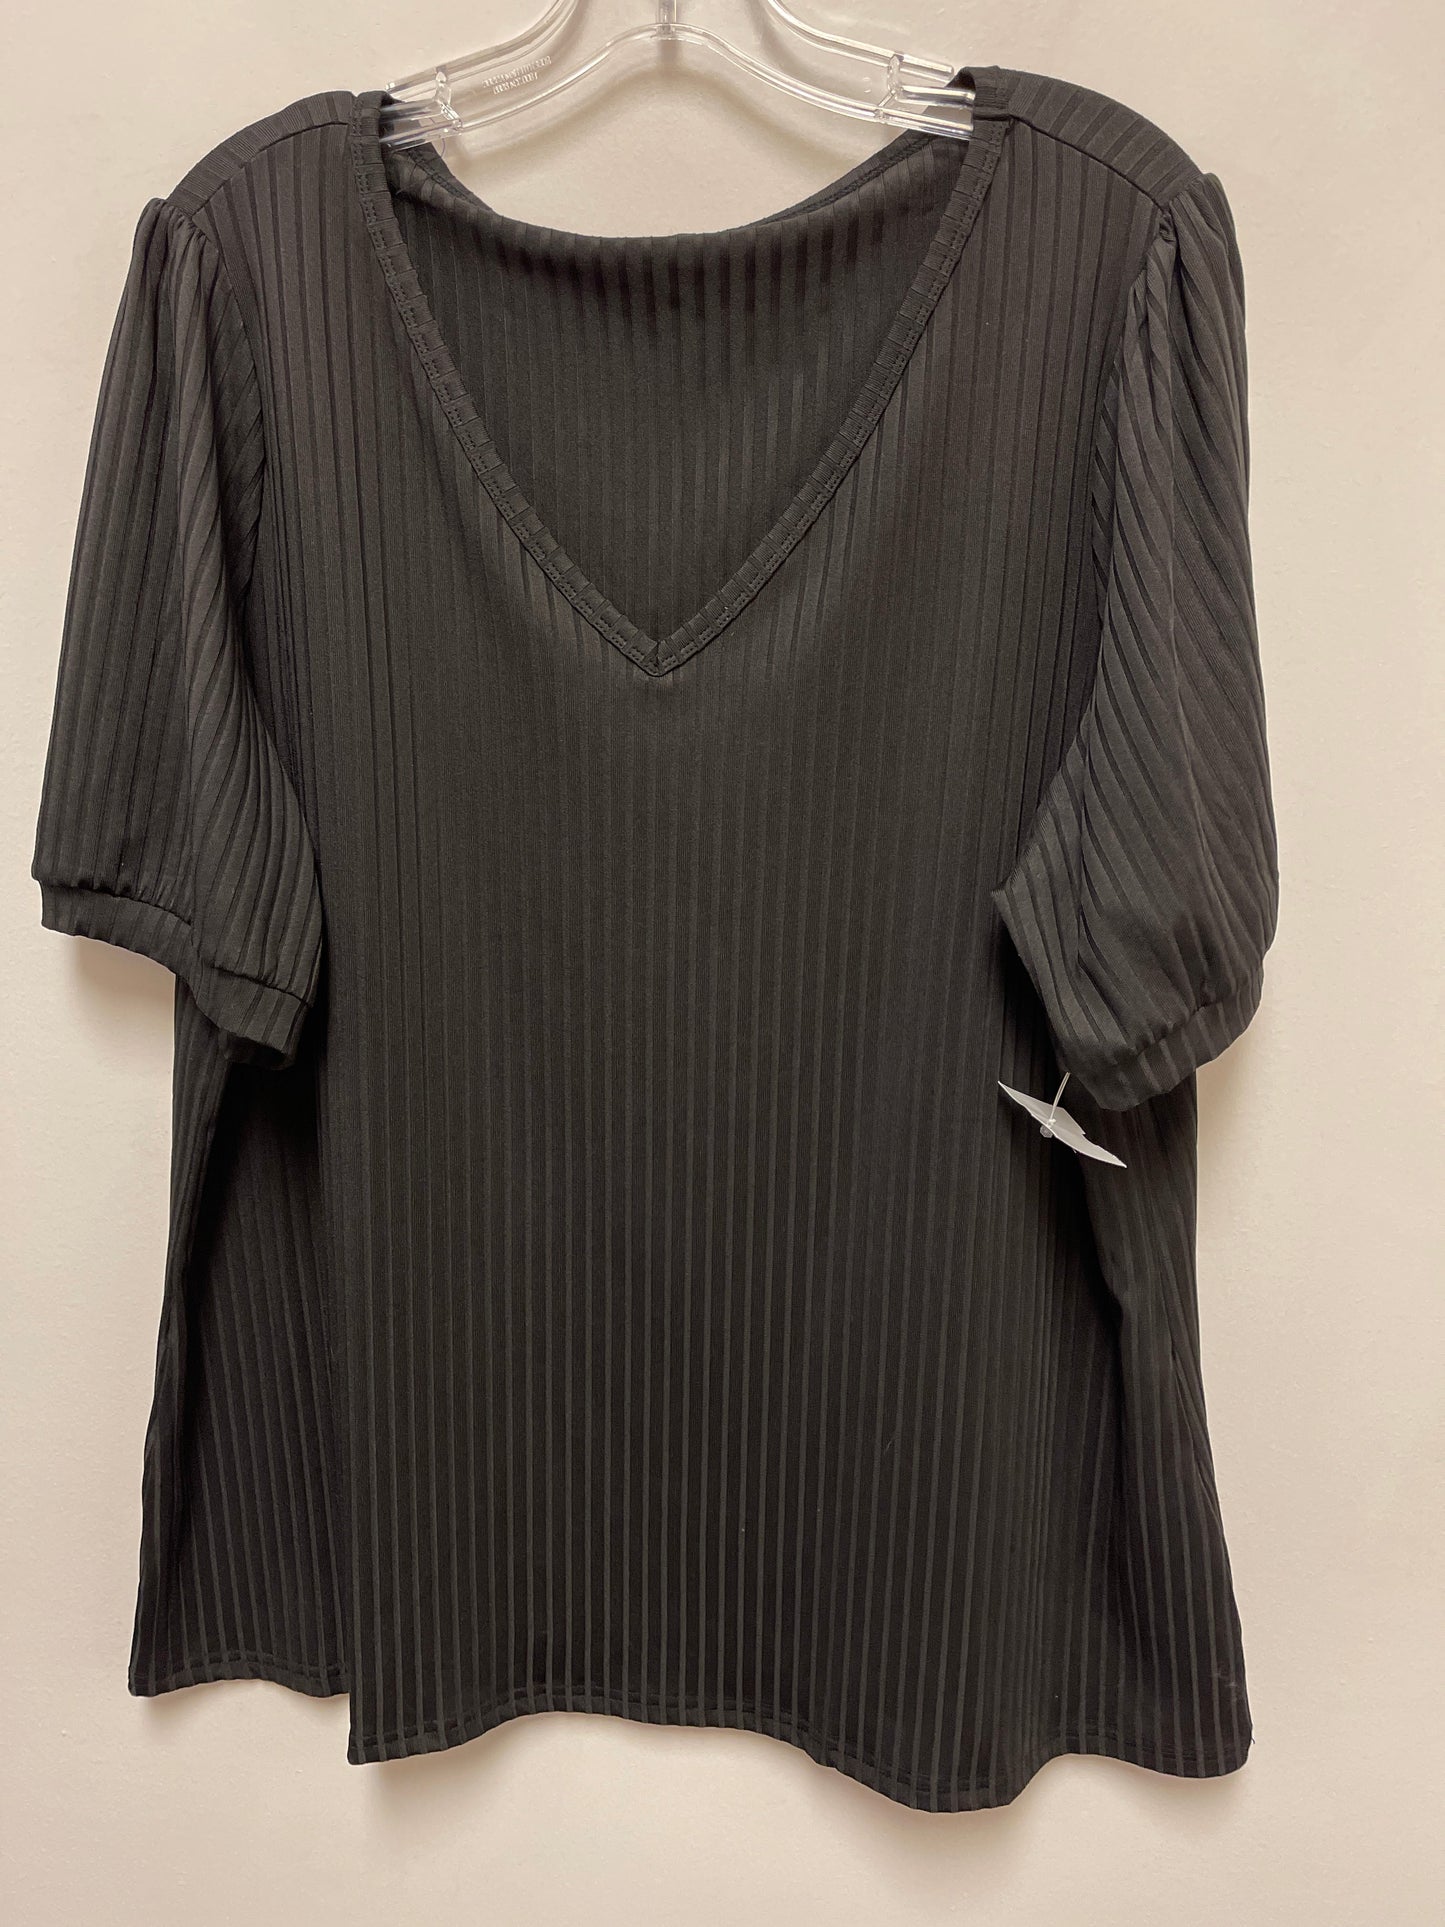 Black Top Short Sleeve Clothes Mentor, Size 2x